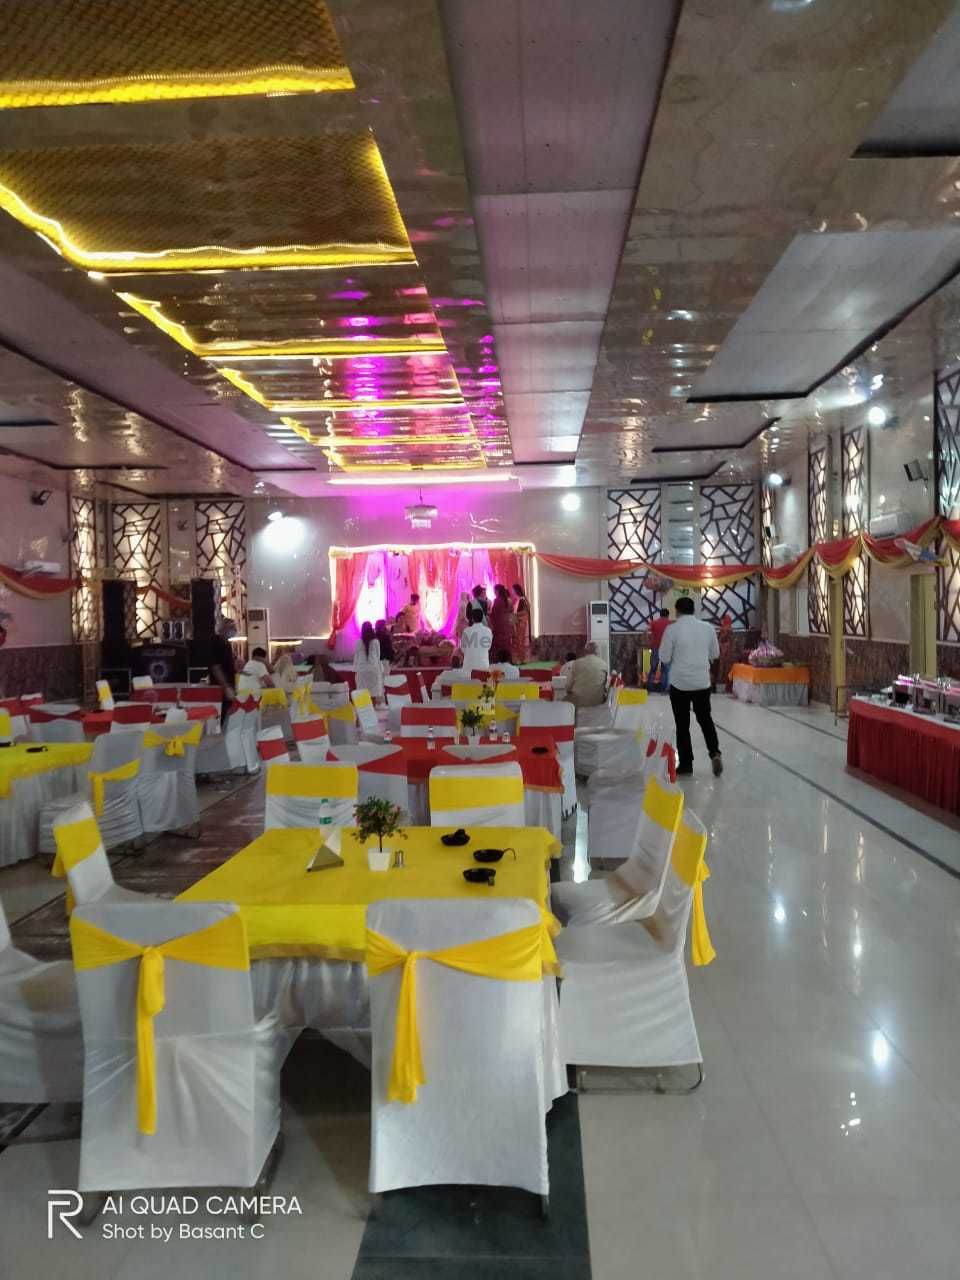 Photo By Imperial Banquet Hall - Venues